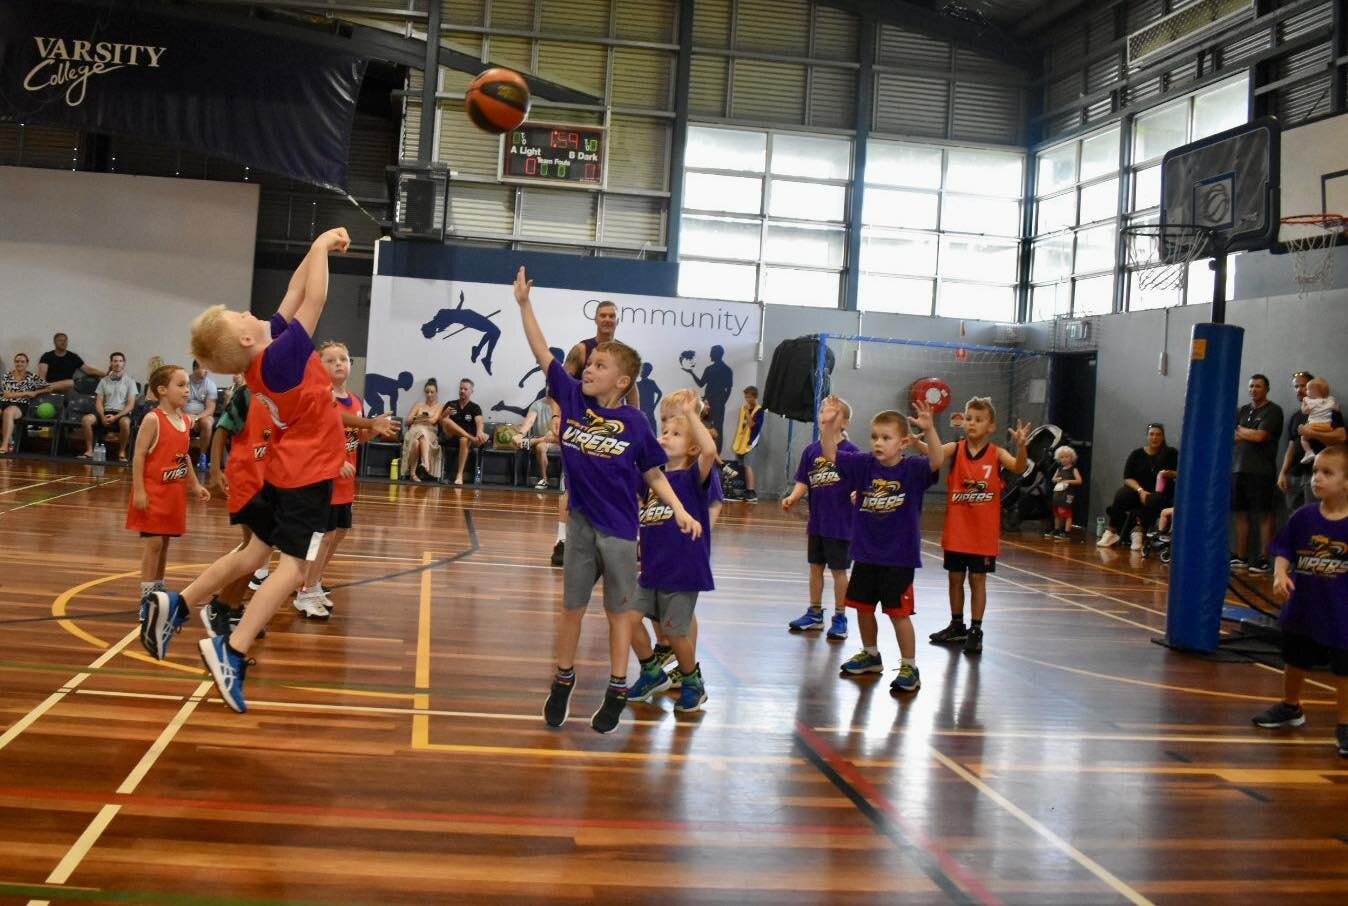 #SaturdaySkills 4 2024 is in the bag. Despite Winter season starting this week, we had plenty of keen ballers on court this morning. Thank you coaches and volunteers for your support today. #PurpleArmy #ViperProud 🏀🟡🟣⛹️⛹️&zwj;♀️🏆⛹️&zwj;♀️⛹️🟣🟡🏀